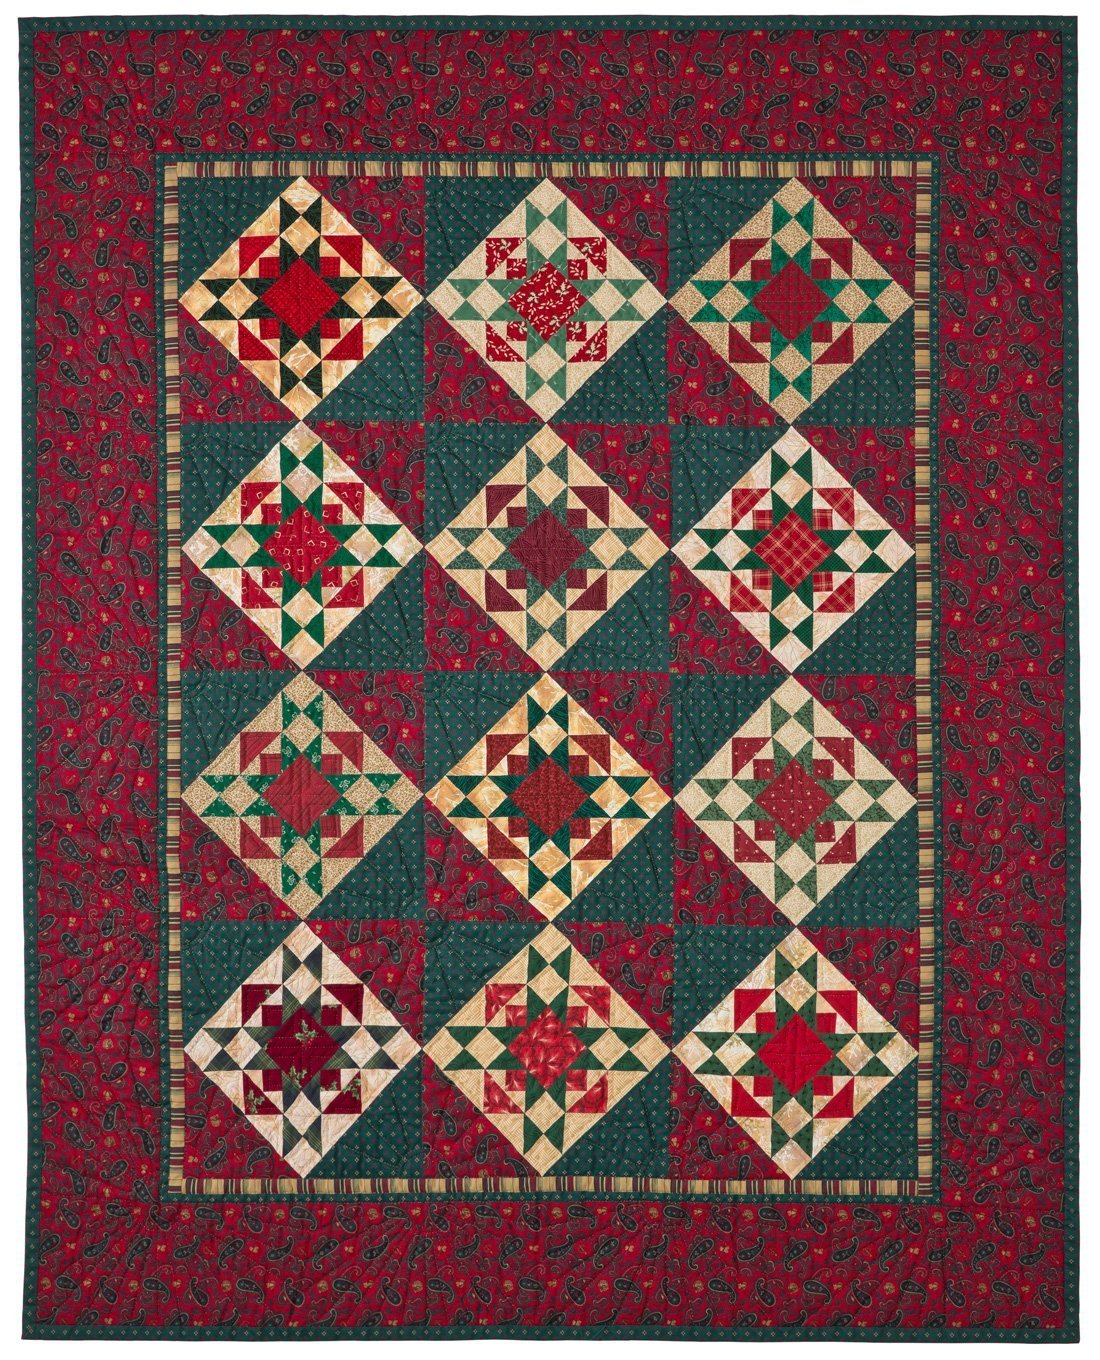 Christmas Star Quilt by Judy Hopkins